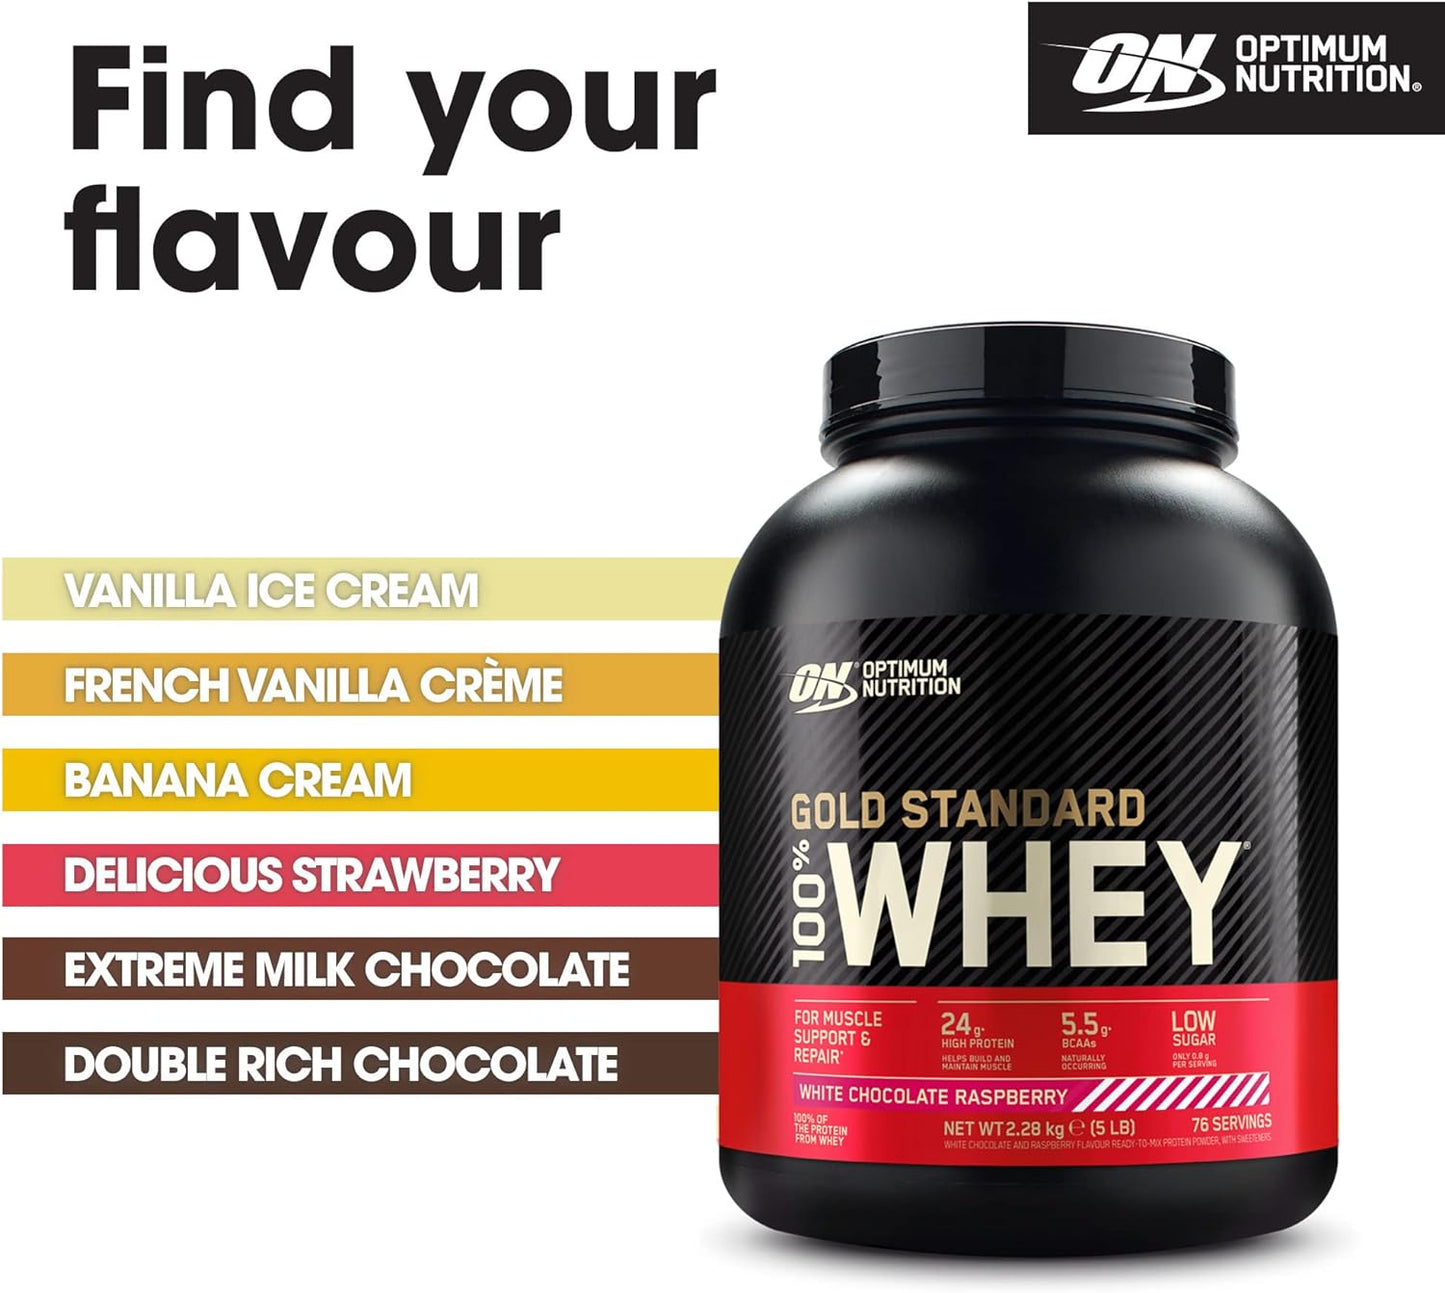 Gold Standard 100% Whey Muscle Building and Recovery Protein Powder with Naturally Occurring Glutamine and BCAA Amino Acids, White Chocolate Raspberry Flavour, 76 Servings, 2.28Kg